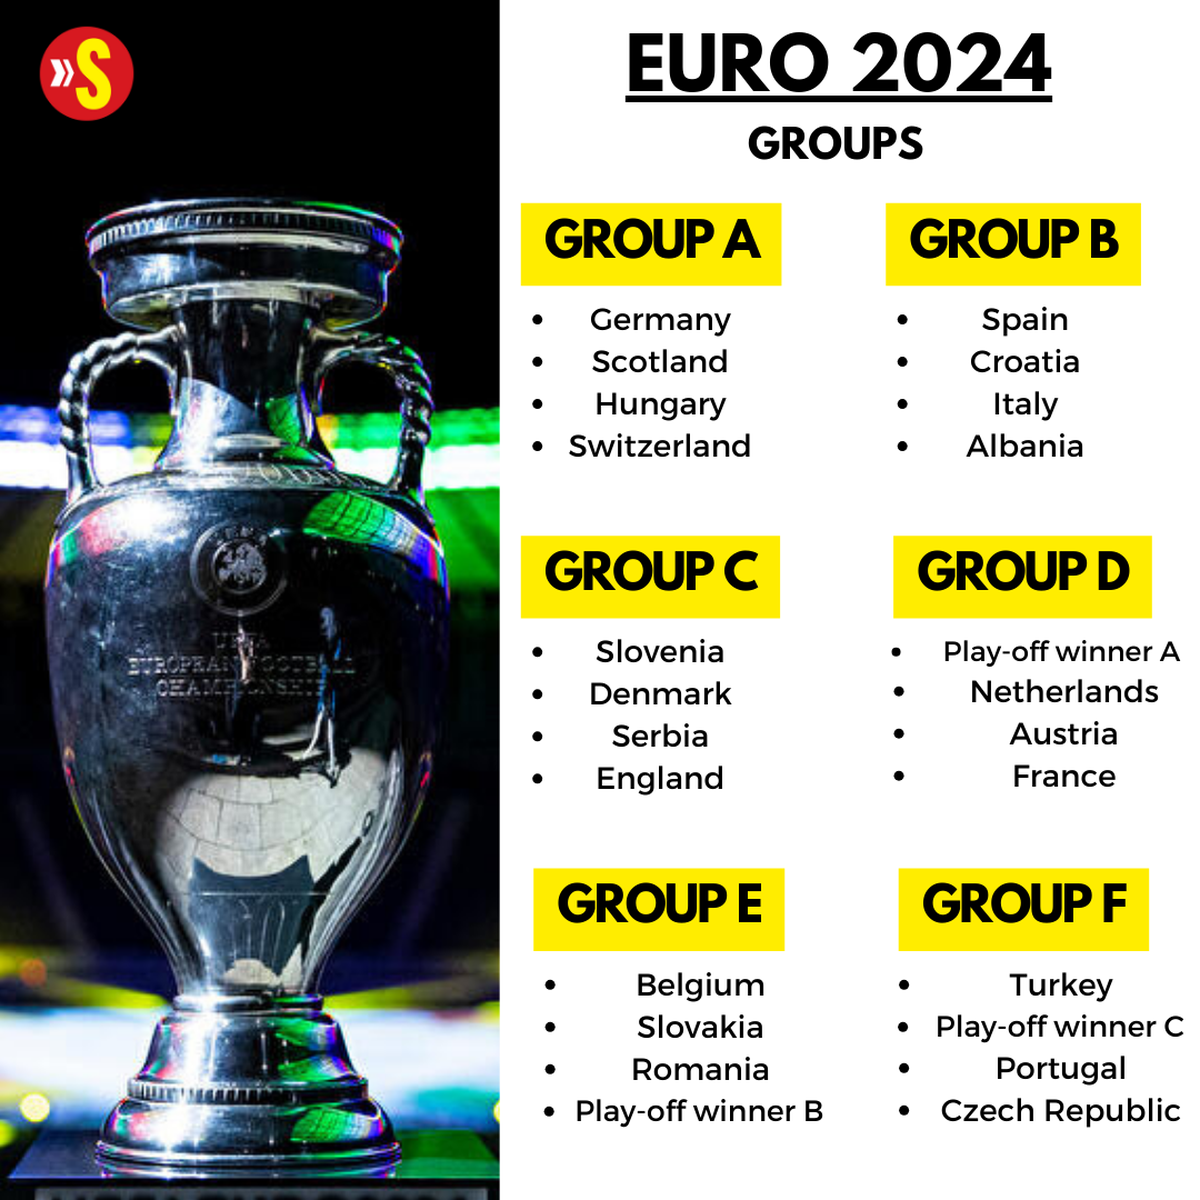 FULL GROUPS AND TEAMS DRAWN FOR EURO 2024 